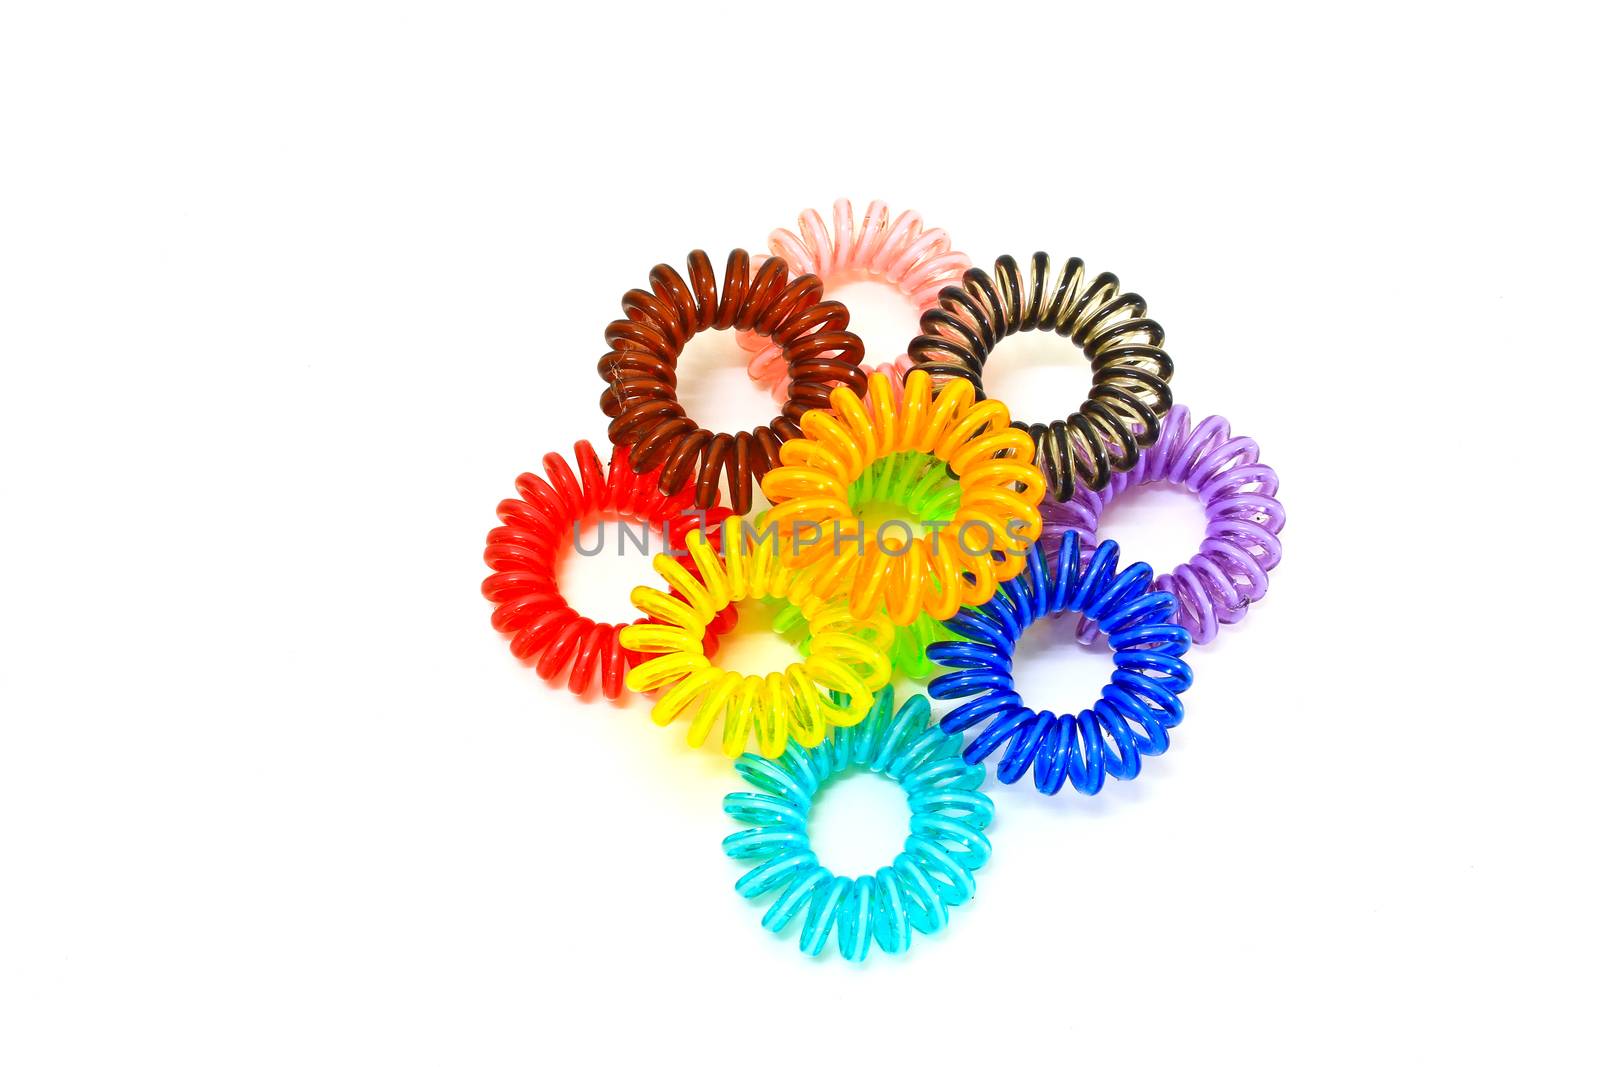 Spiral colorful elastic hair ties used on a white background.